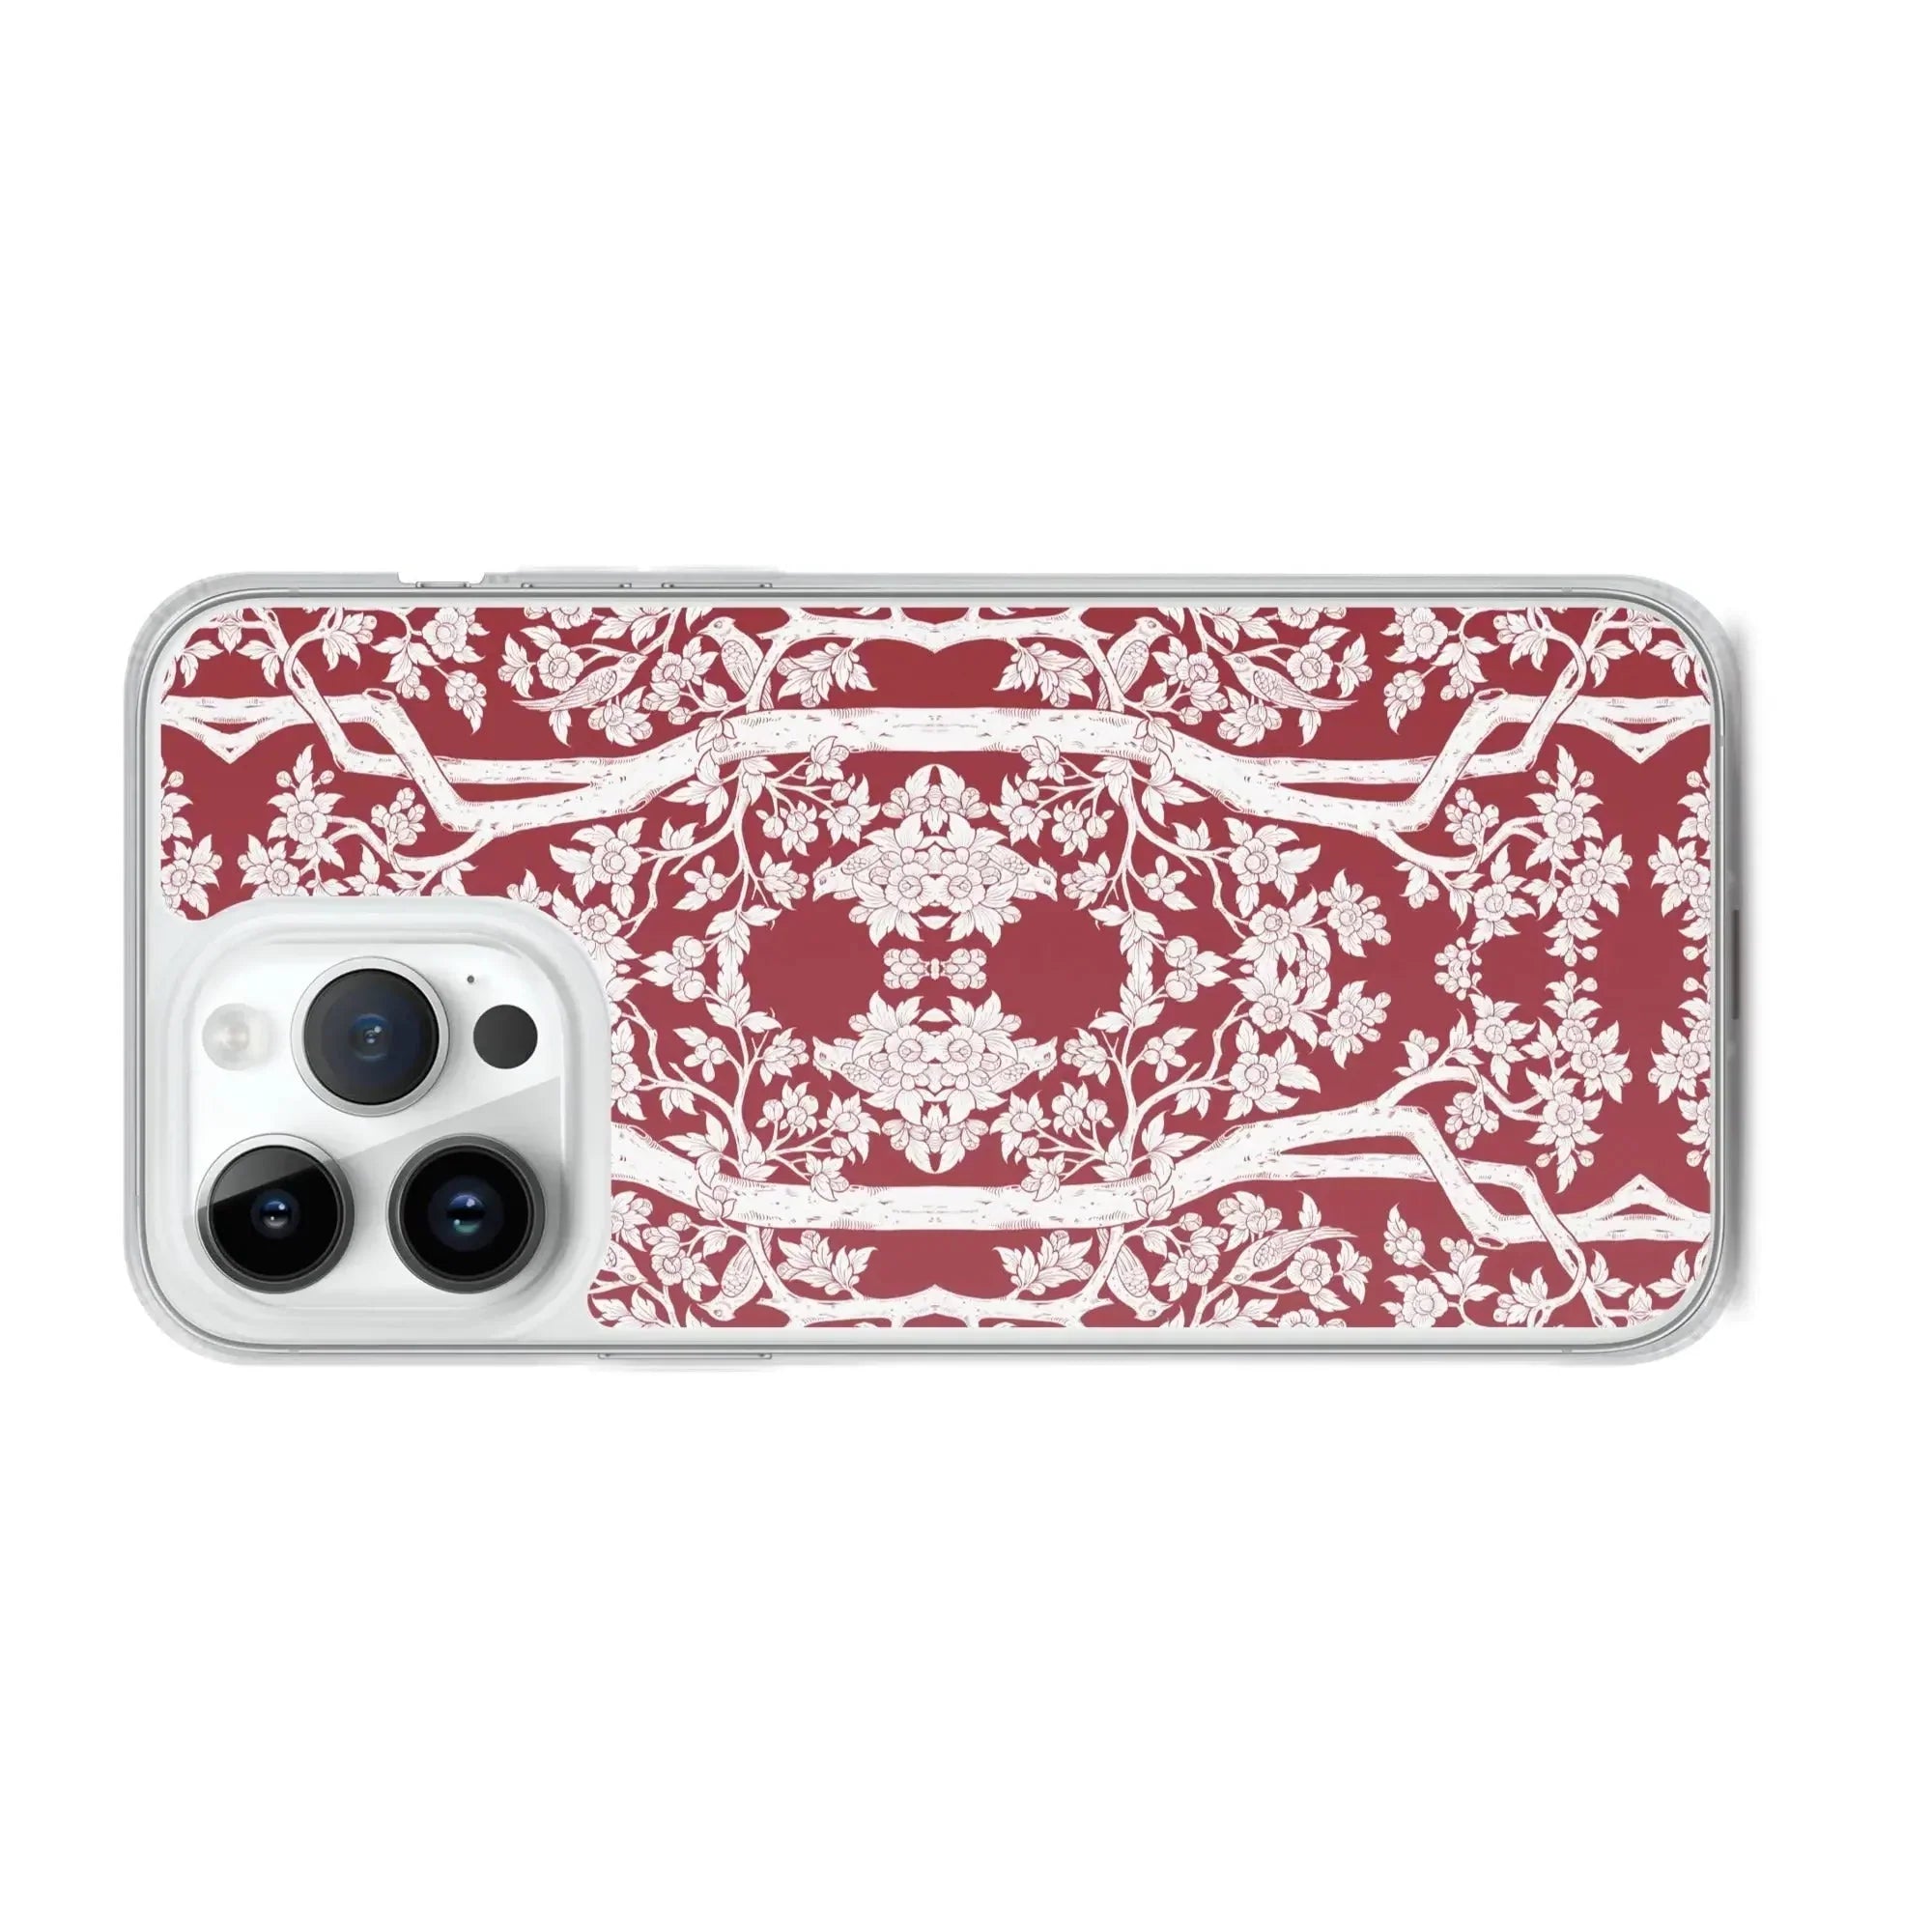 Textures and Patterns | Art Phone Cases